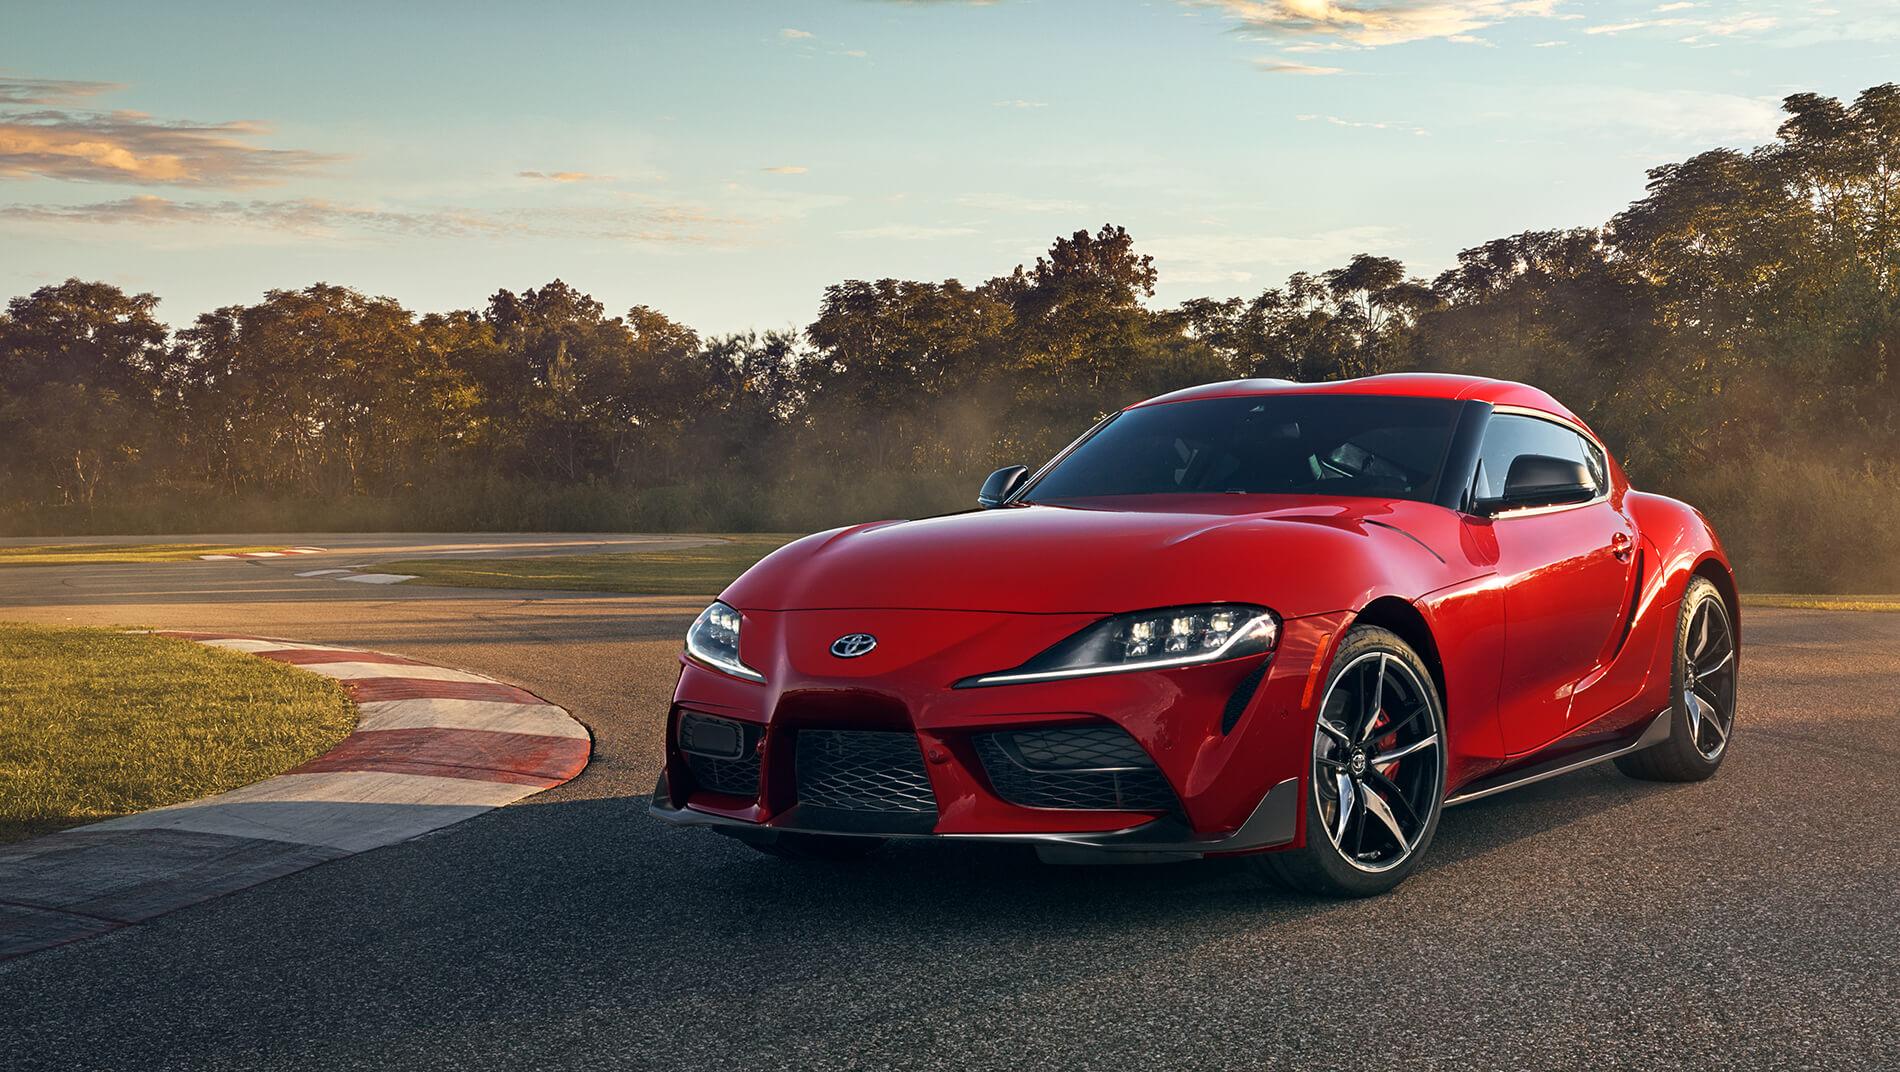 2023 Toyota Supra in red on race course